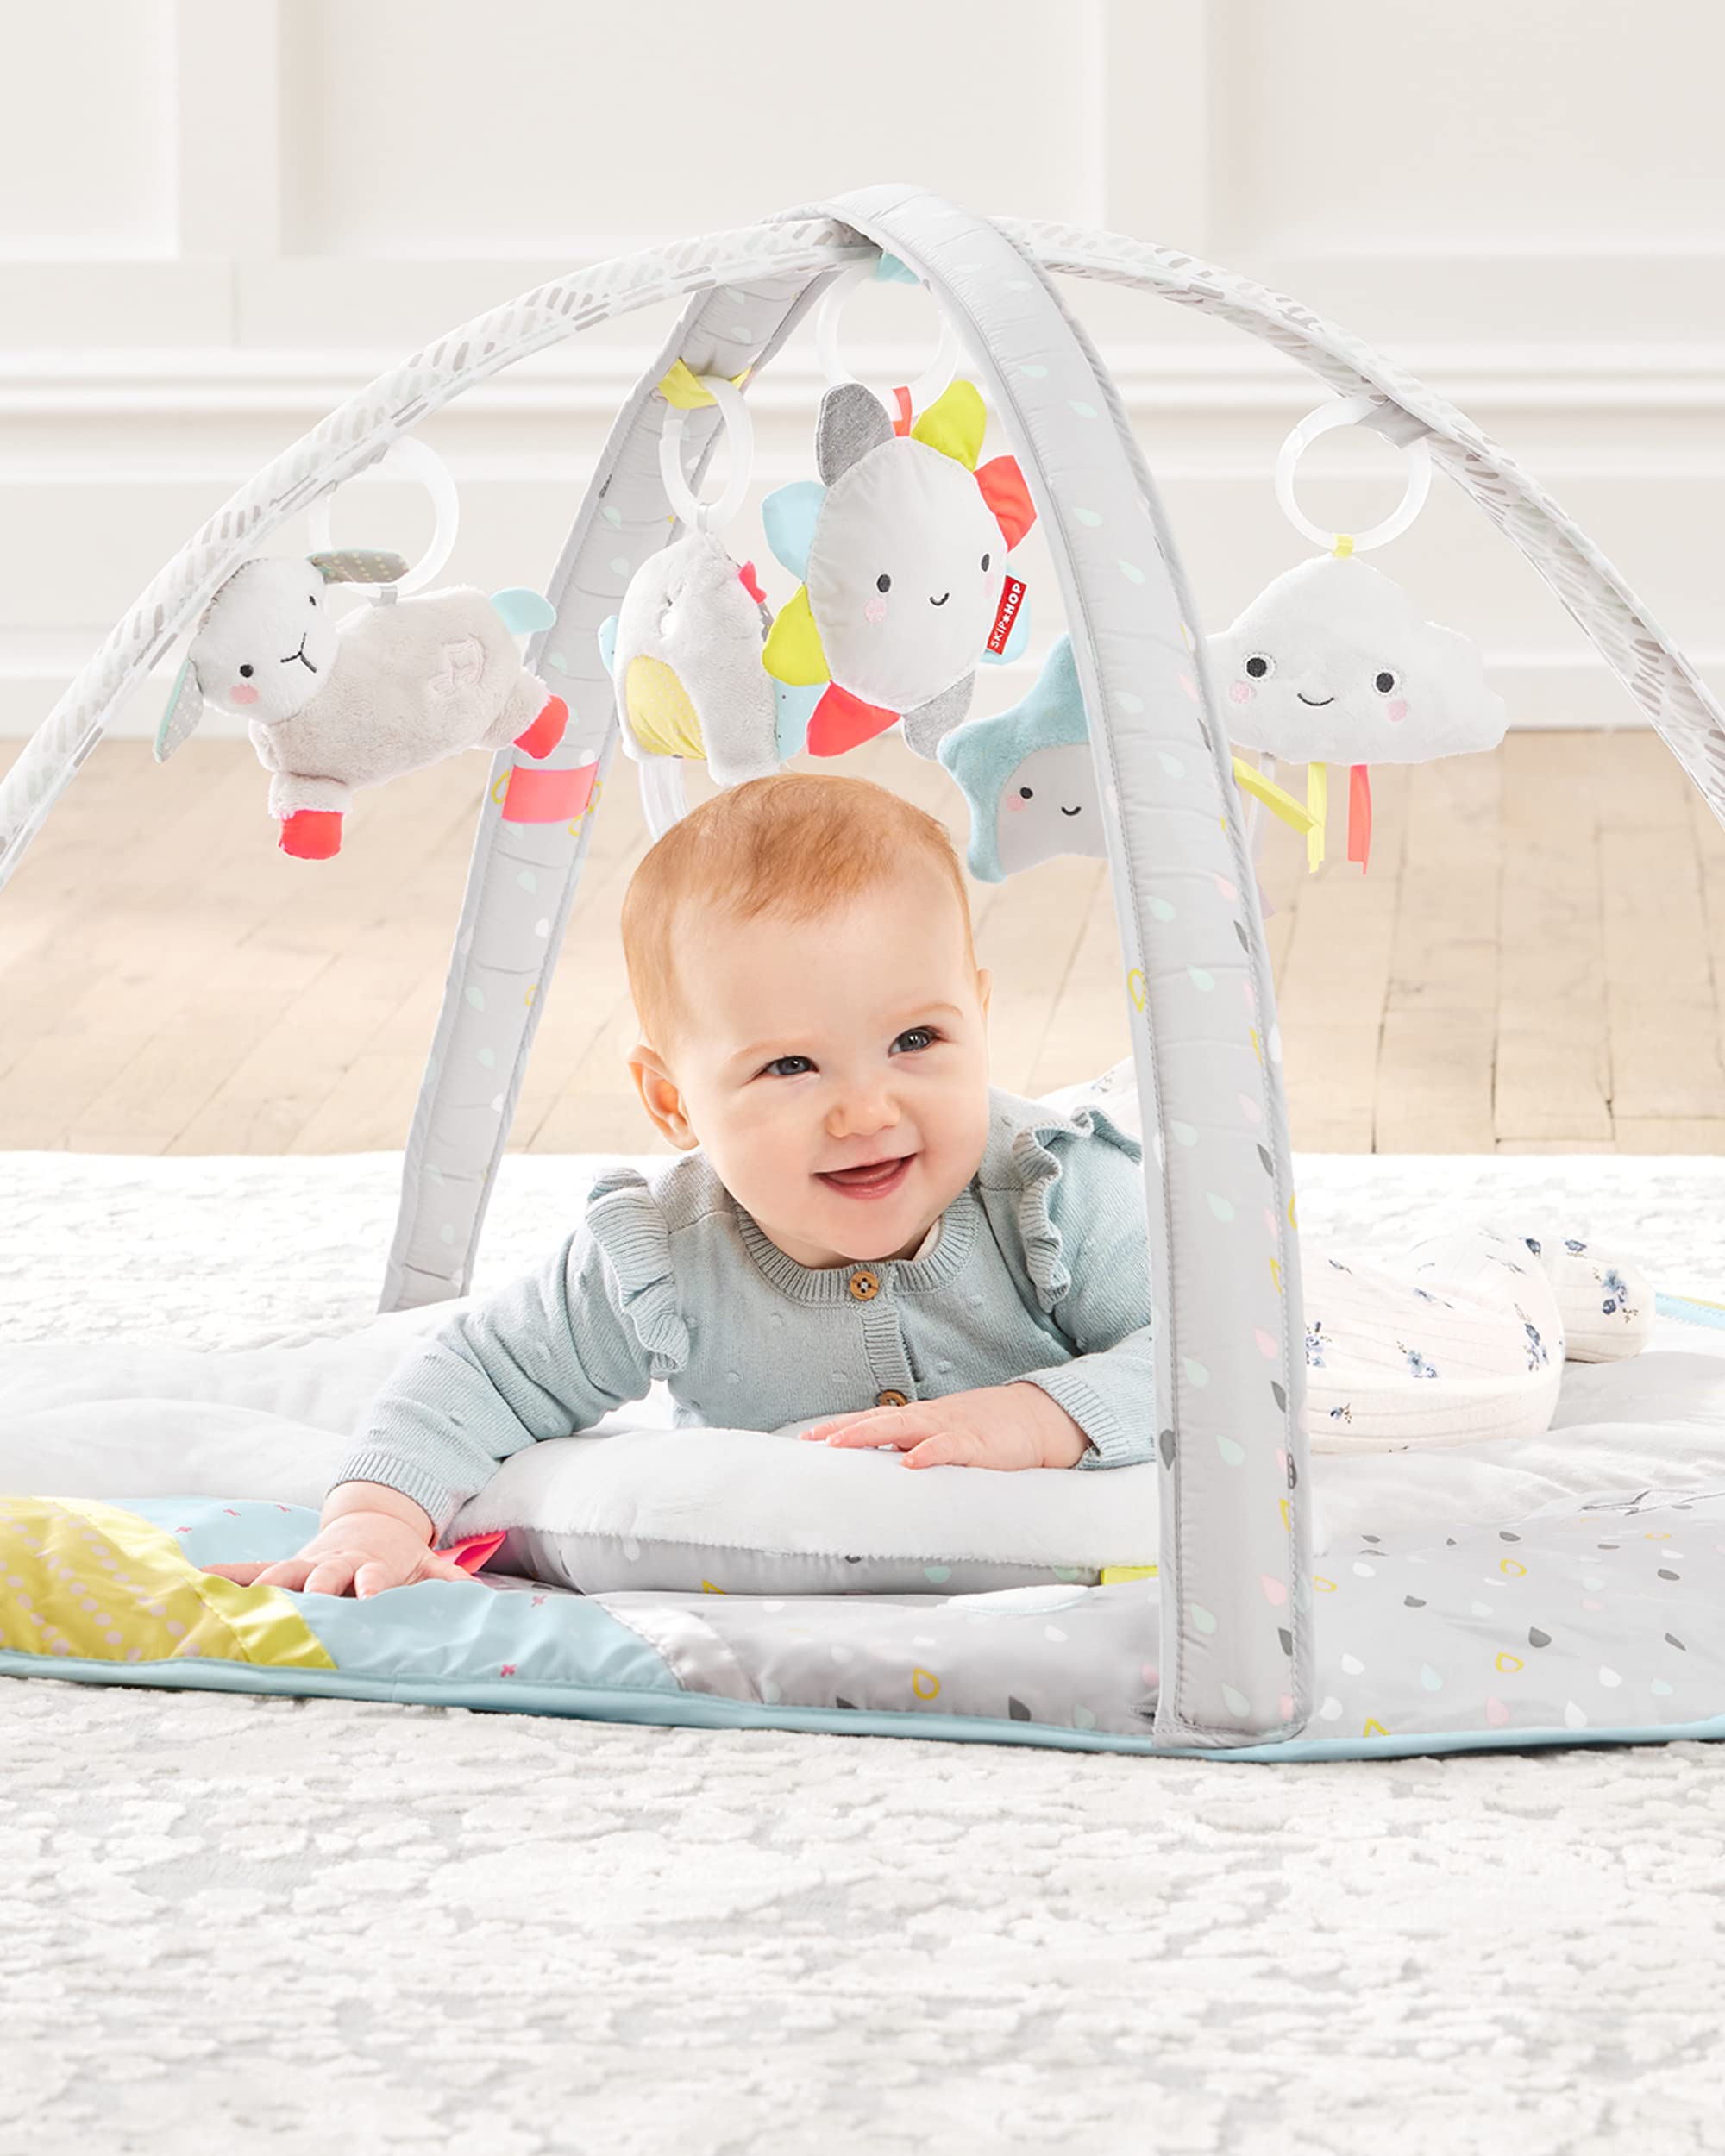 Skip Hop Baby Play Gym and Infant Playmat, Silver Lining Cloud, Grey & Baby Stroller Toy, Silver Lining Cloud Jitter, Cloud